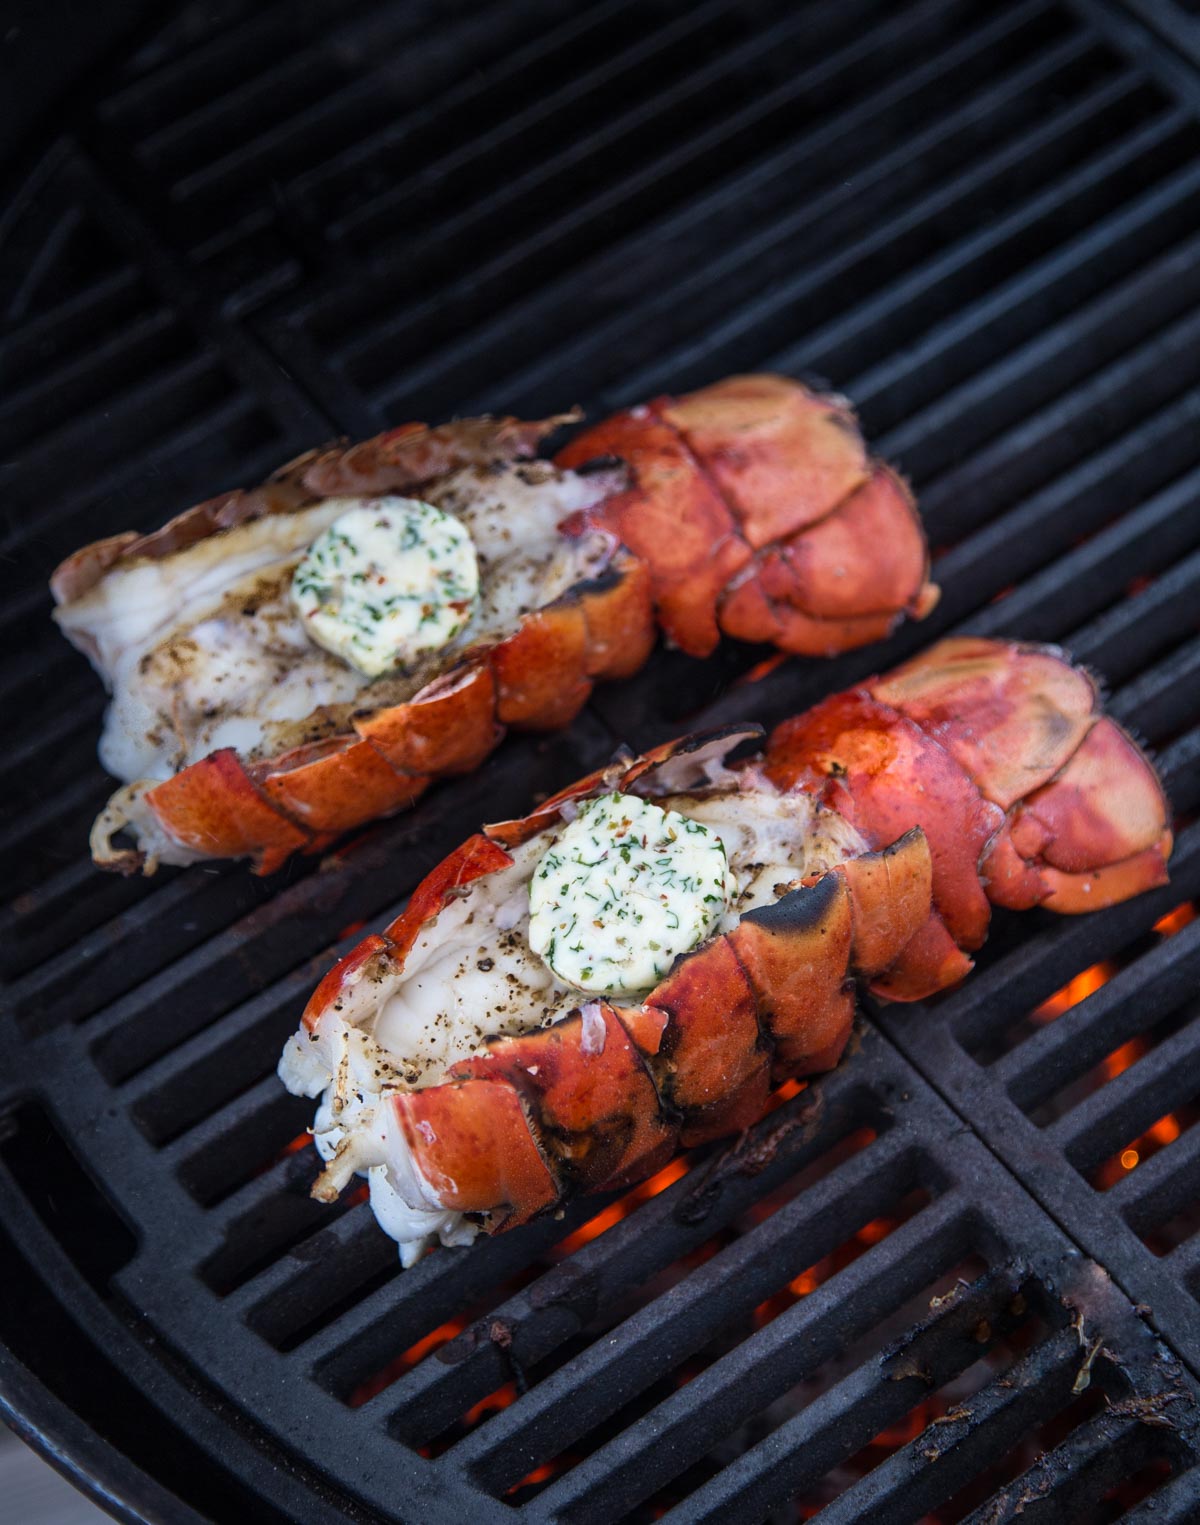 Two Lobster tails grilling on the grill